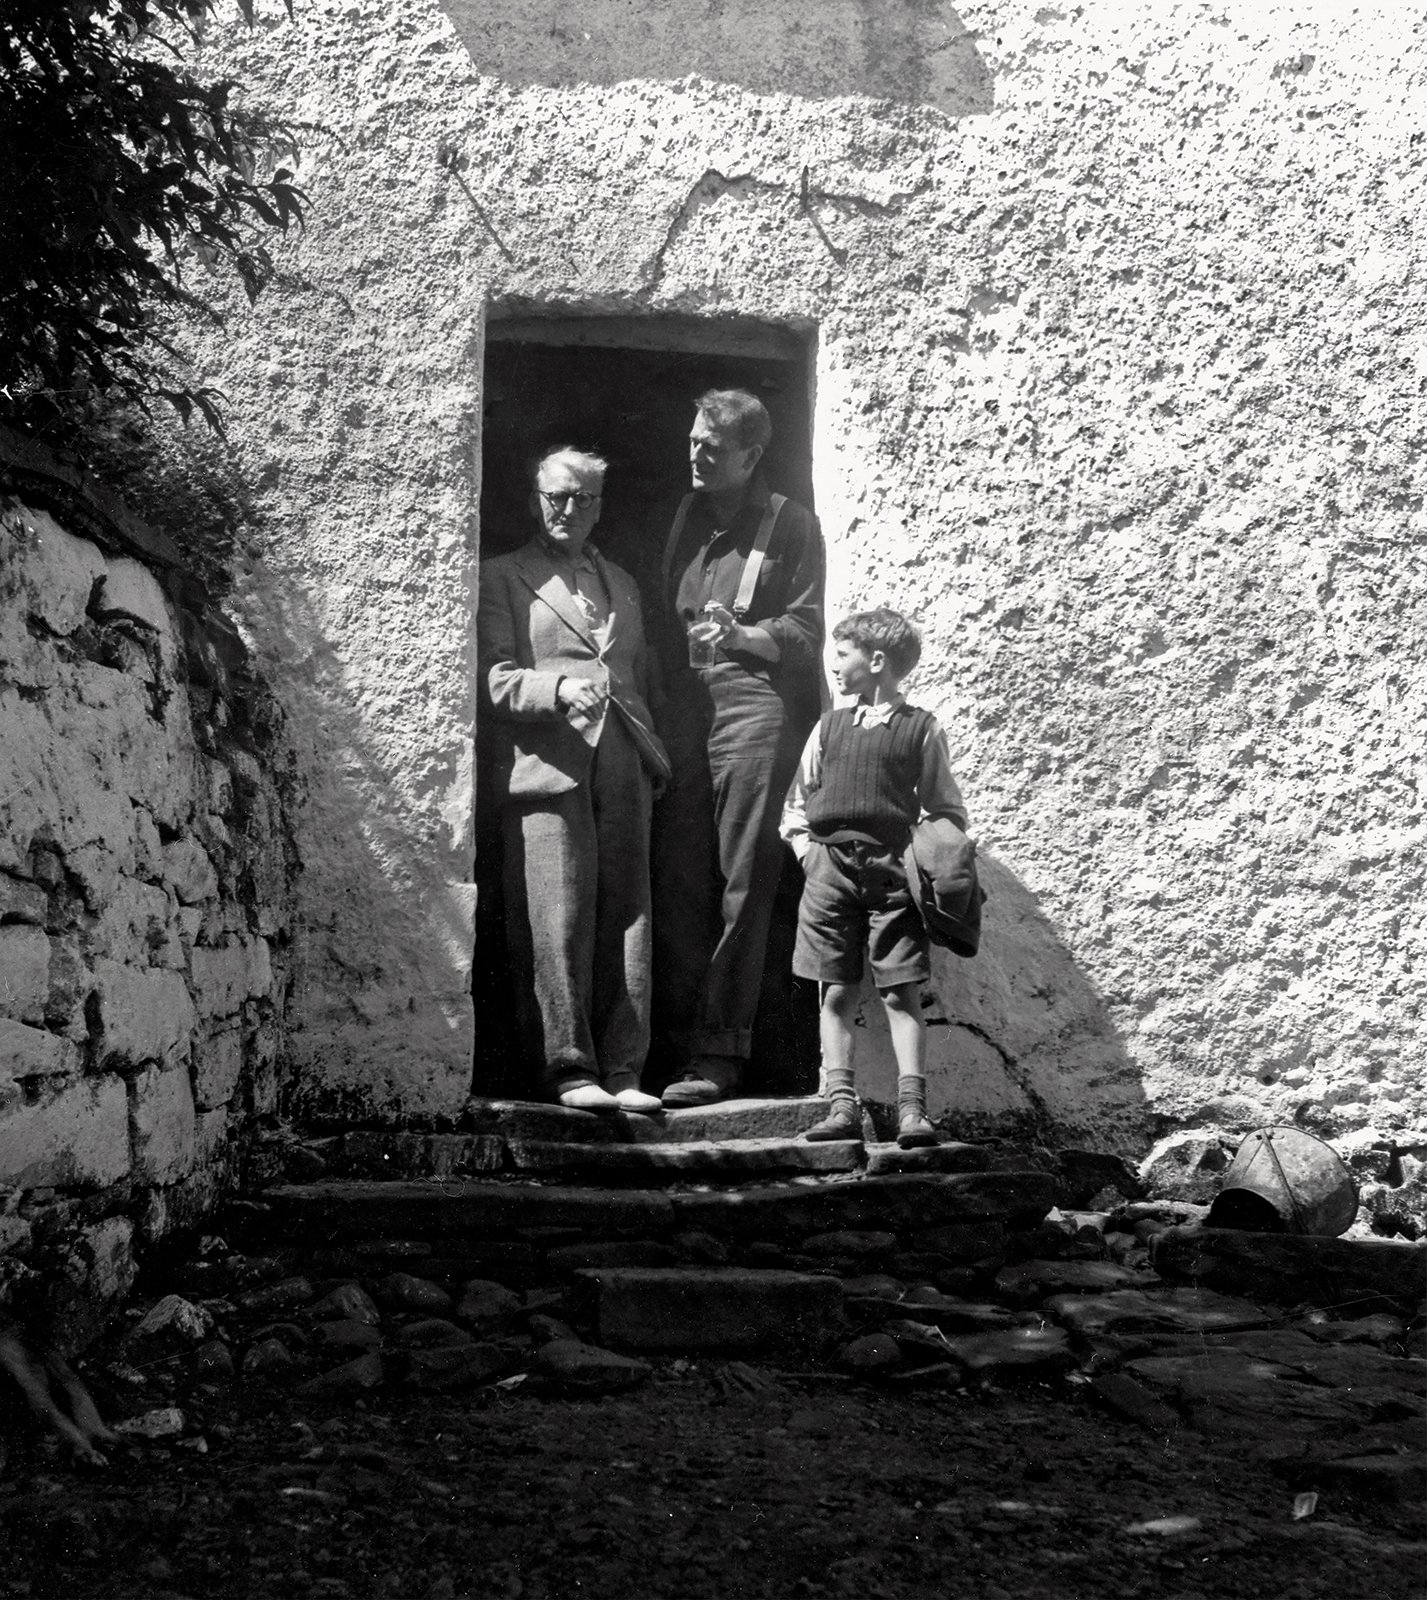 Ernie O’Malley, John Wayne and Cormac O’Malley on the set of The Quiet Man, County Mayo, 1951.